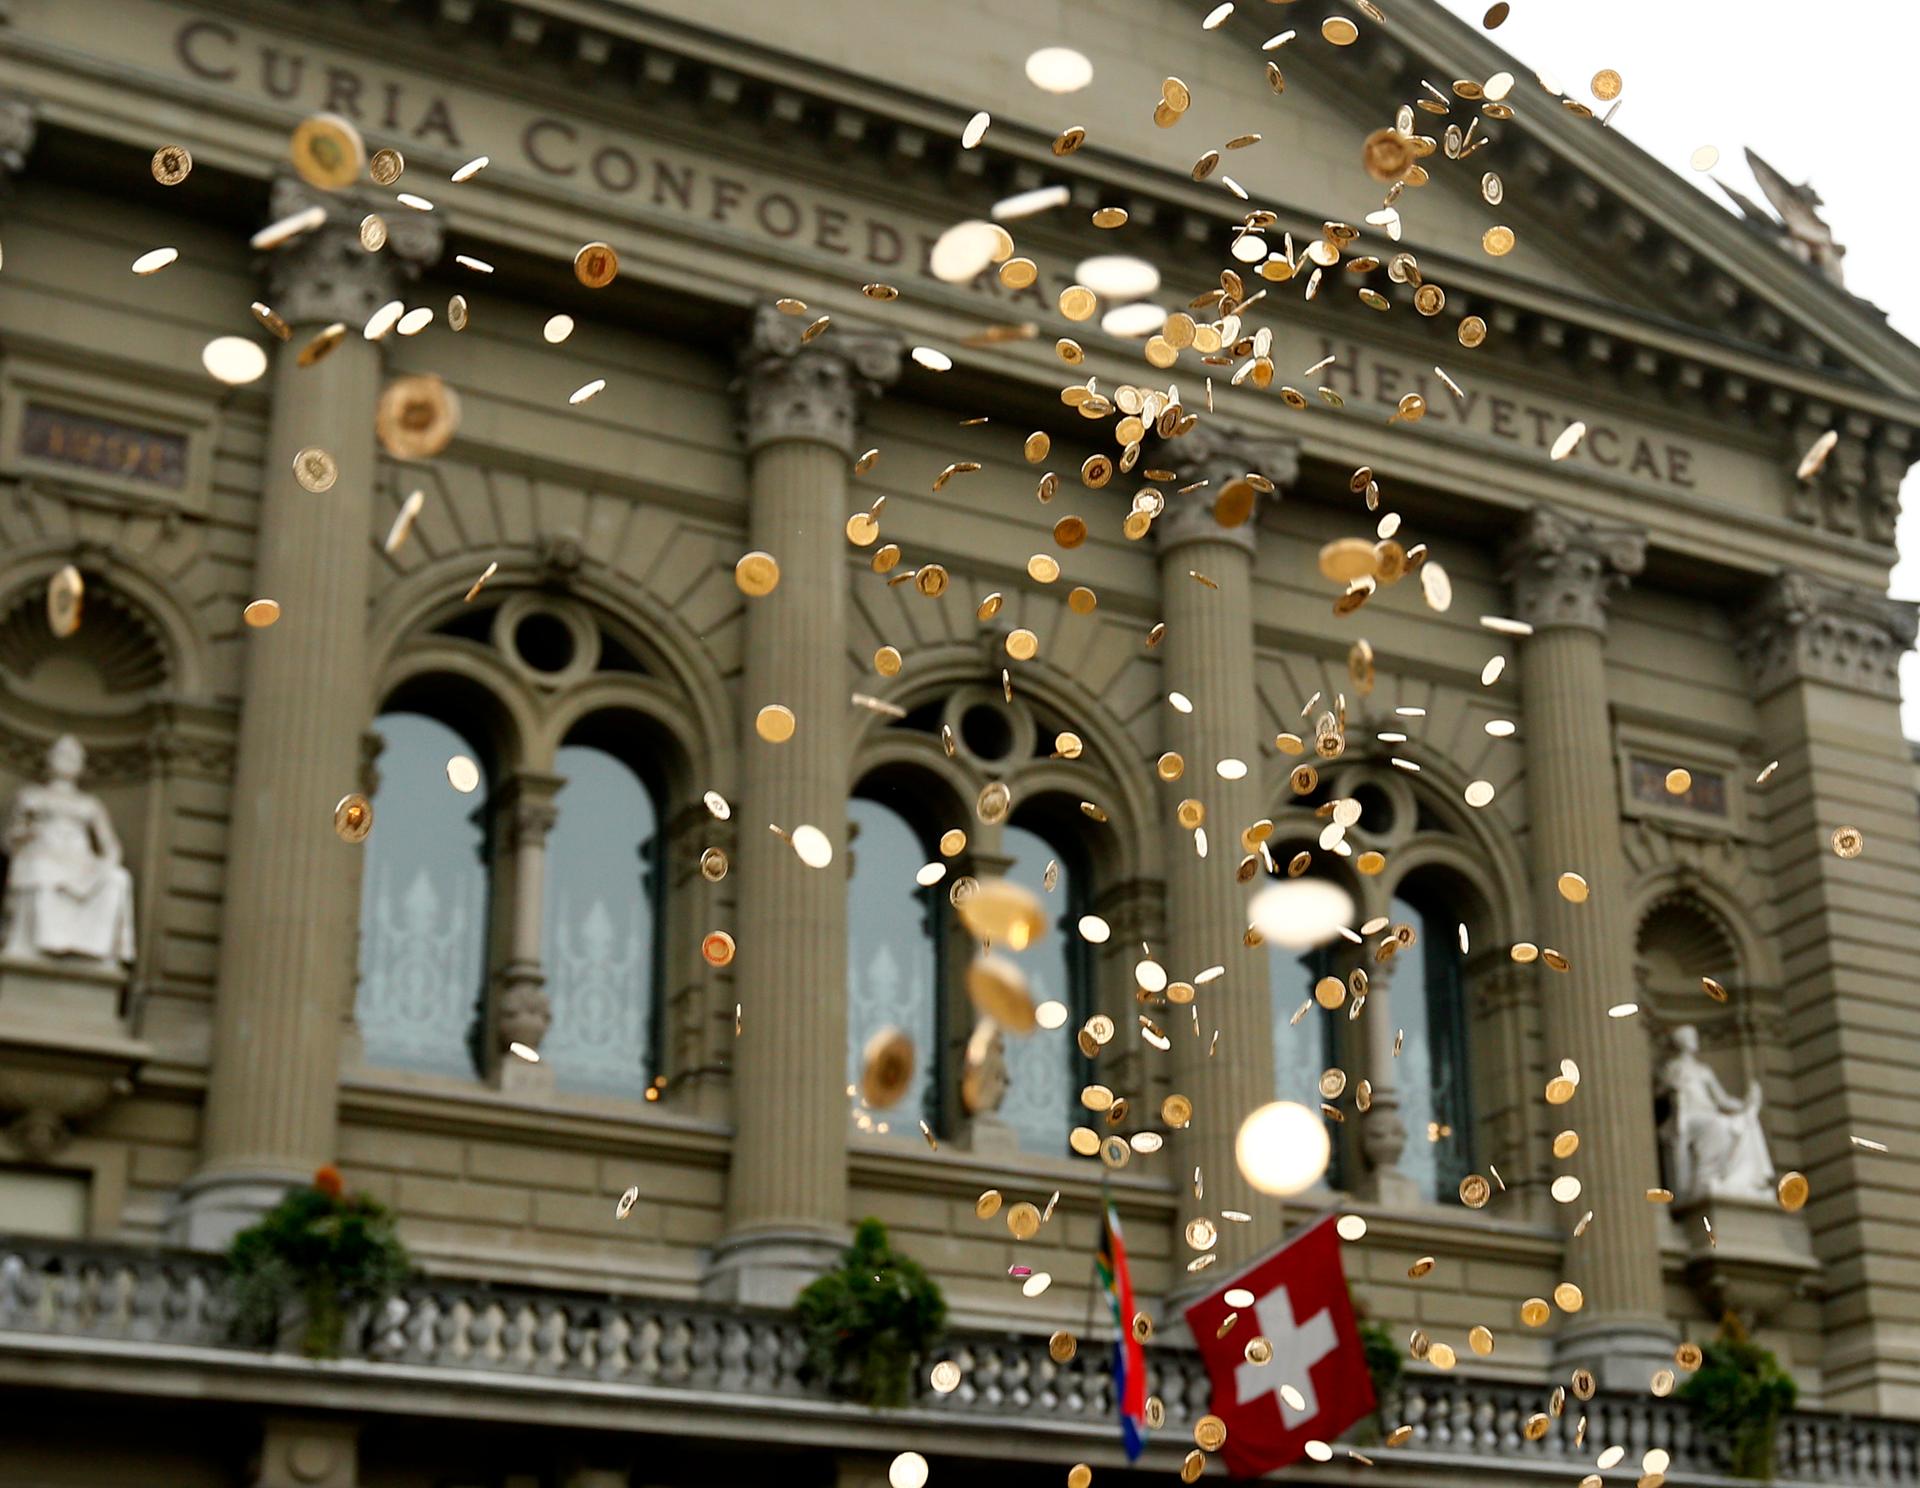 Five cent coins are pictured in the air in front of the Federal Palace in Bern, Switzerland, during an event organised by the committee that delivered 126,000 signatures to the parliament to propose a minimum monthly disposal household income of CHF 2,500